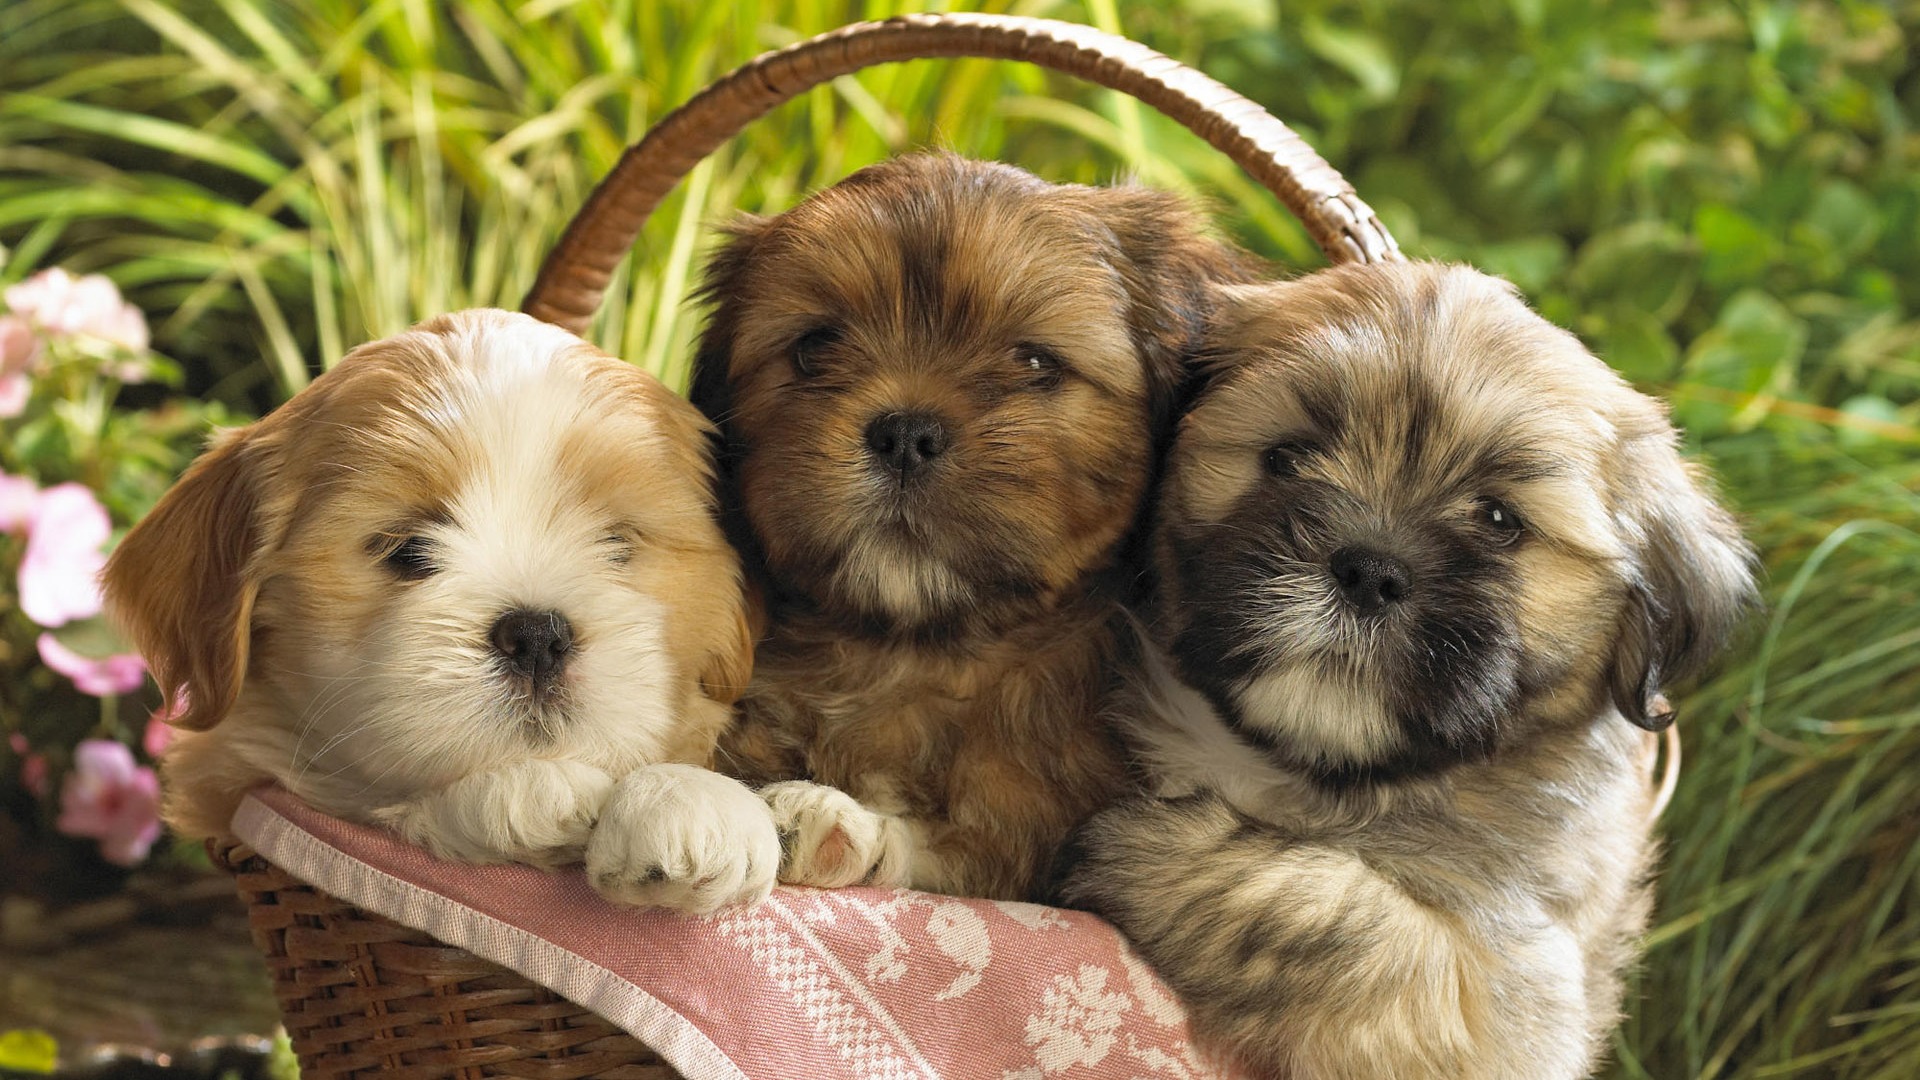 Puppy Photo HD wallpapers (9) #19 - 1920x1080